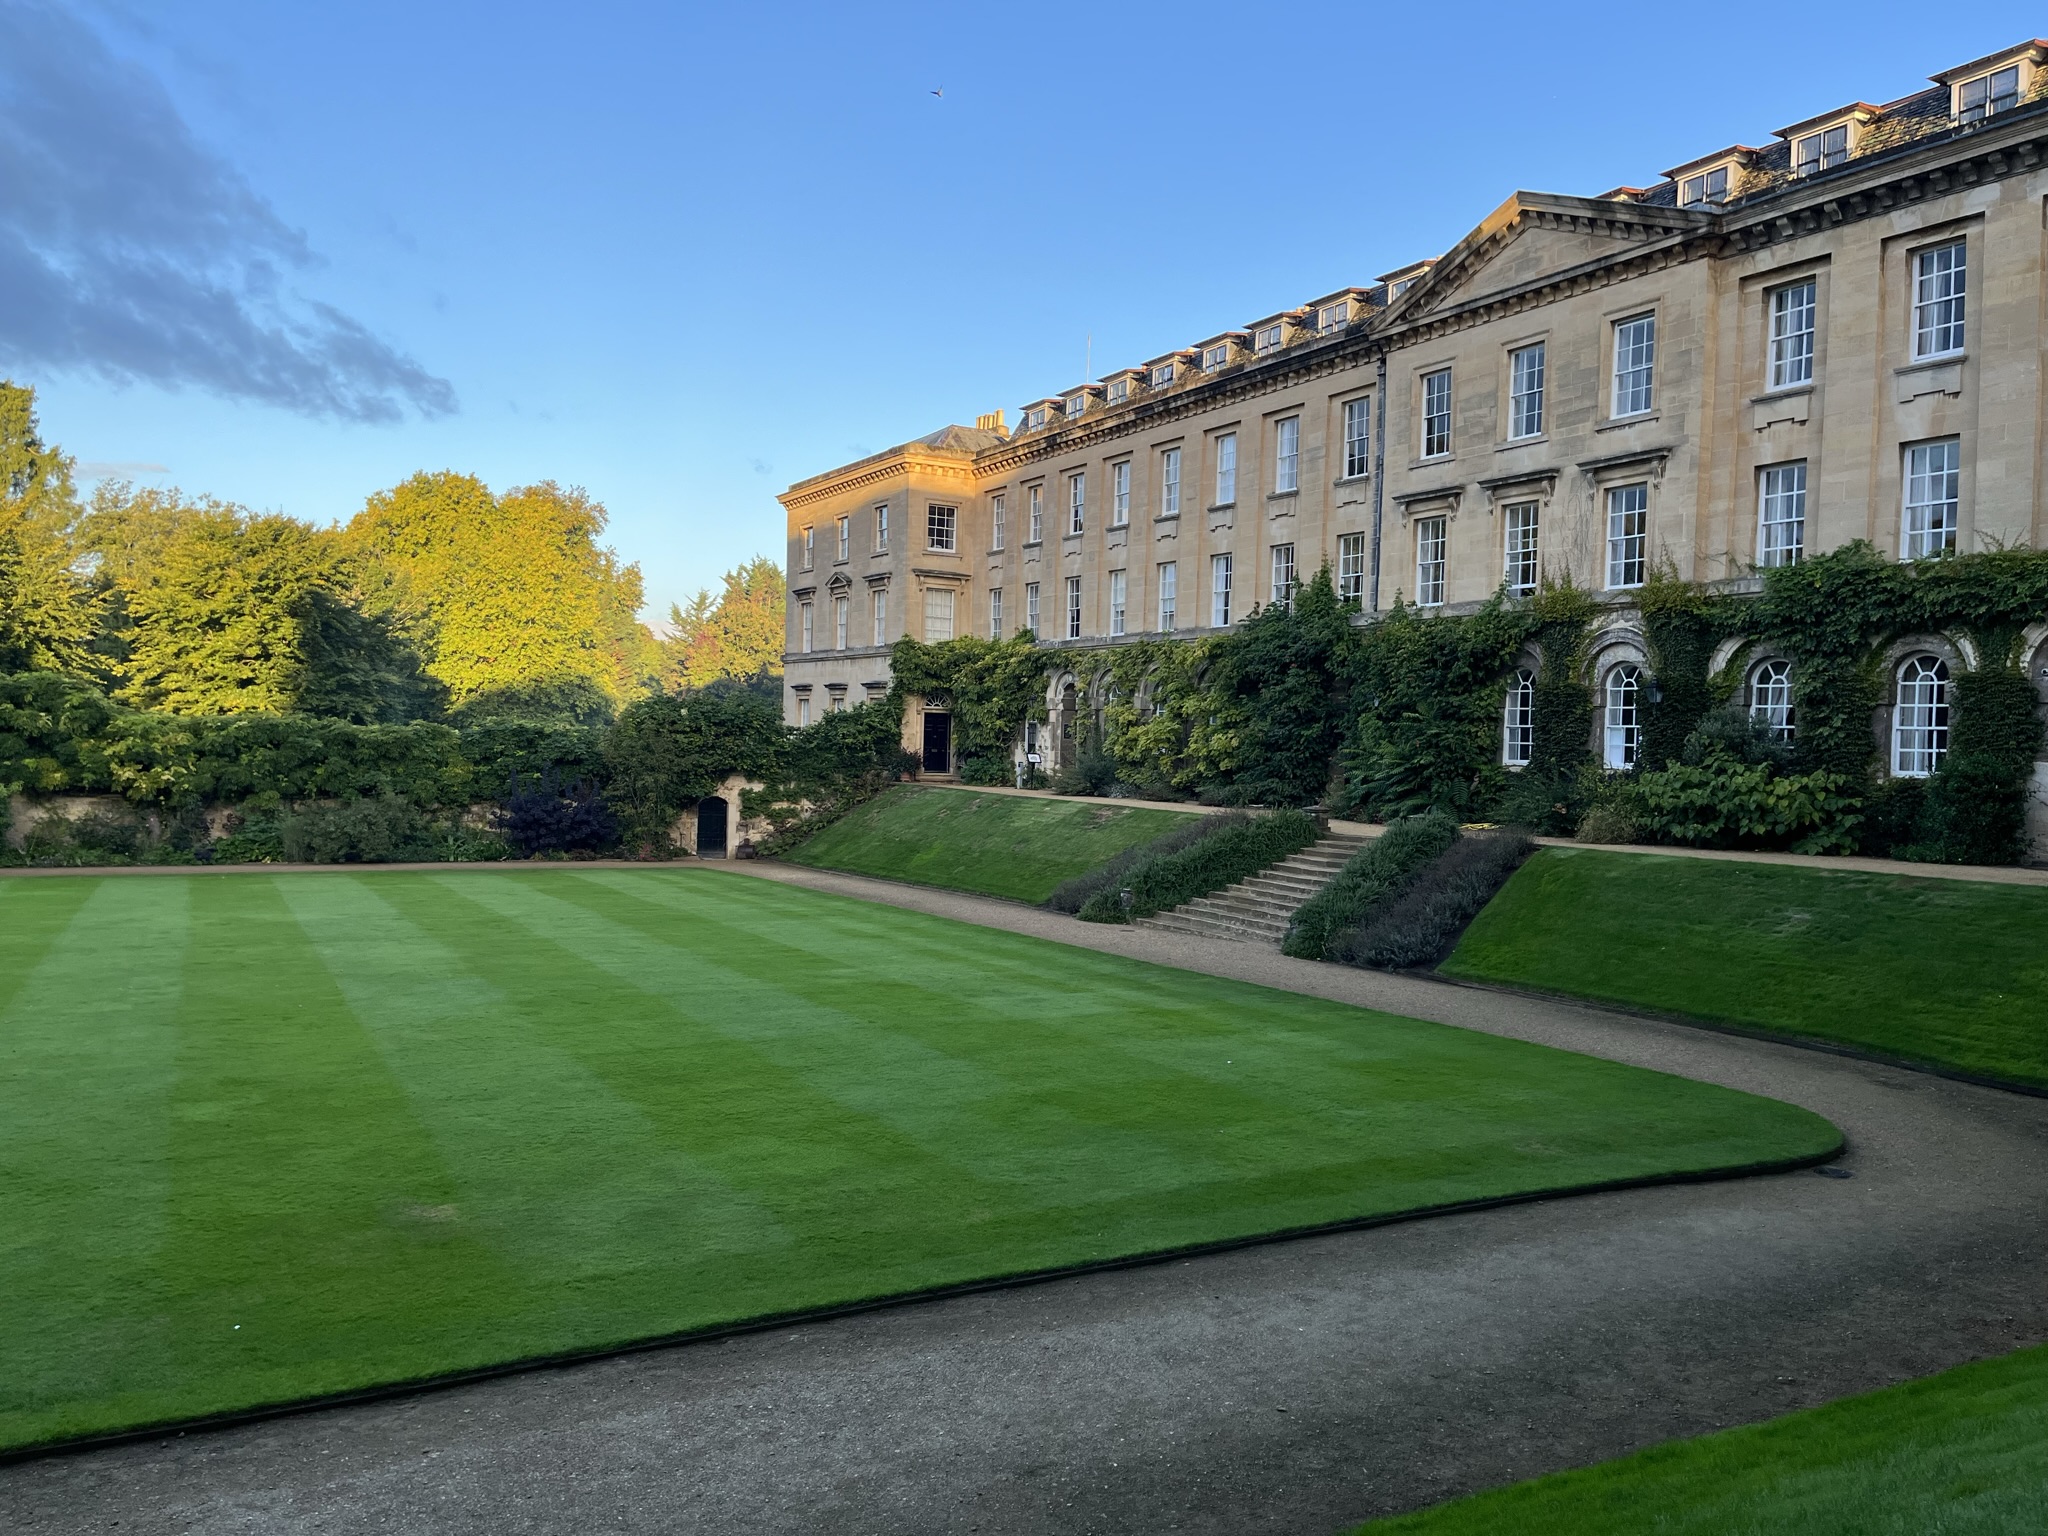  SultaWorcester College, University of Oxford.